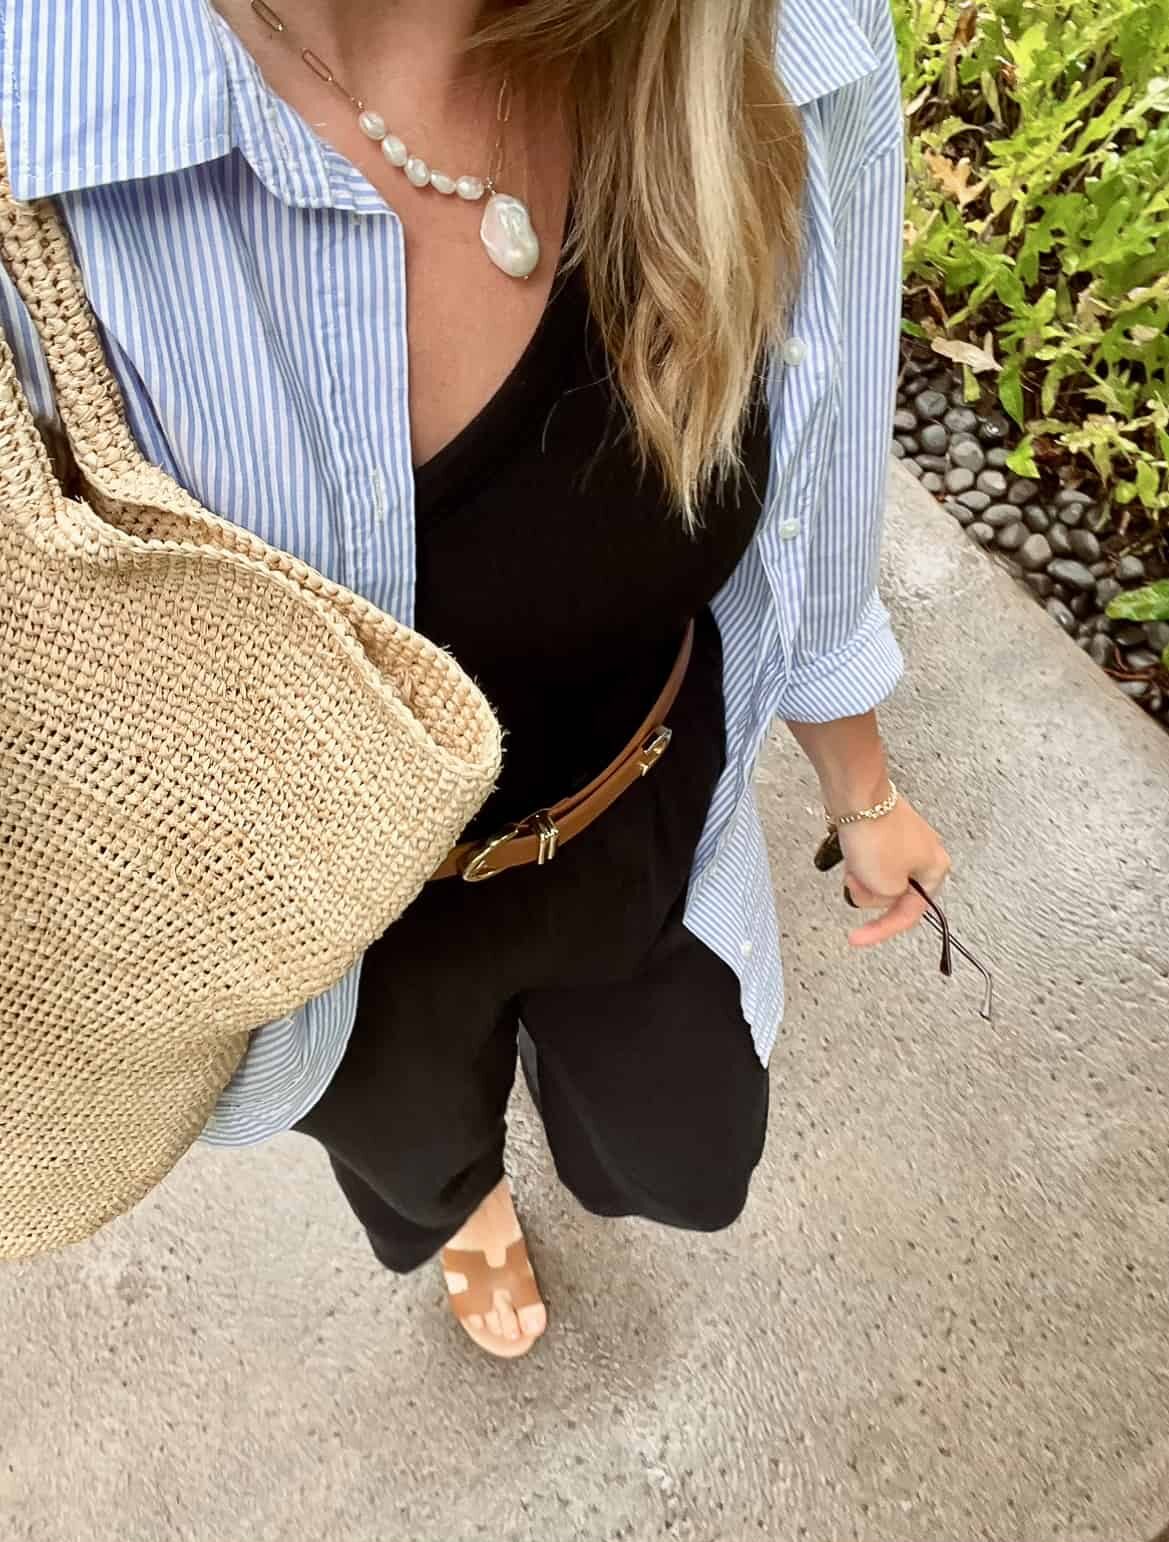 woman wearing a blue striped shirt over a black top with black pants and brown leather sandals